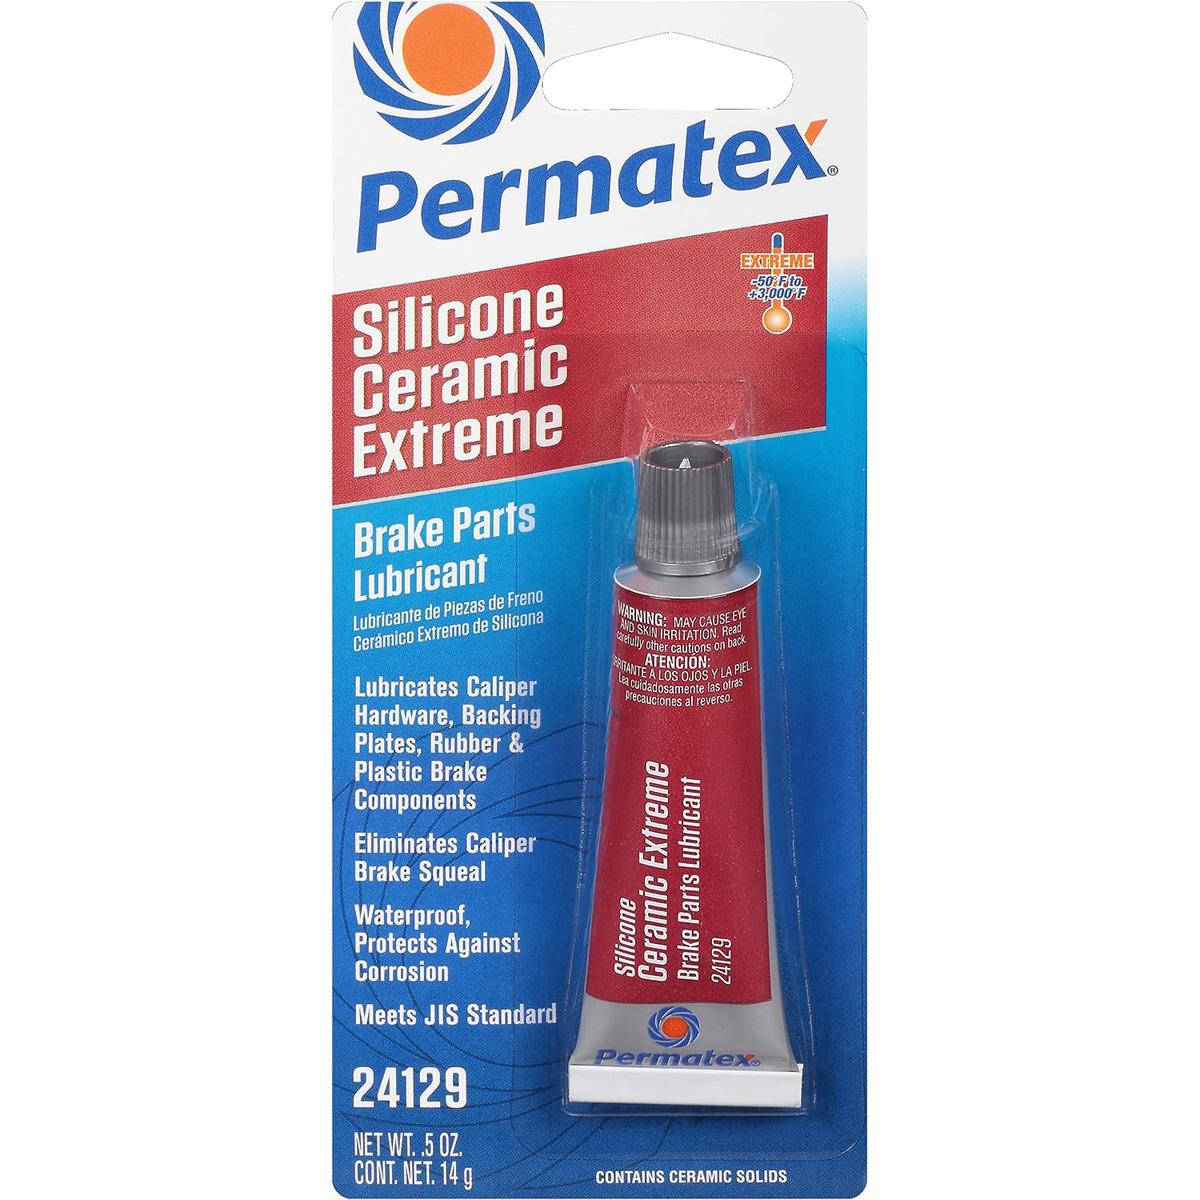 Permatex Silicone Extreme Brake Parts Lubricant for $2.58